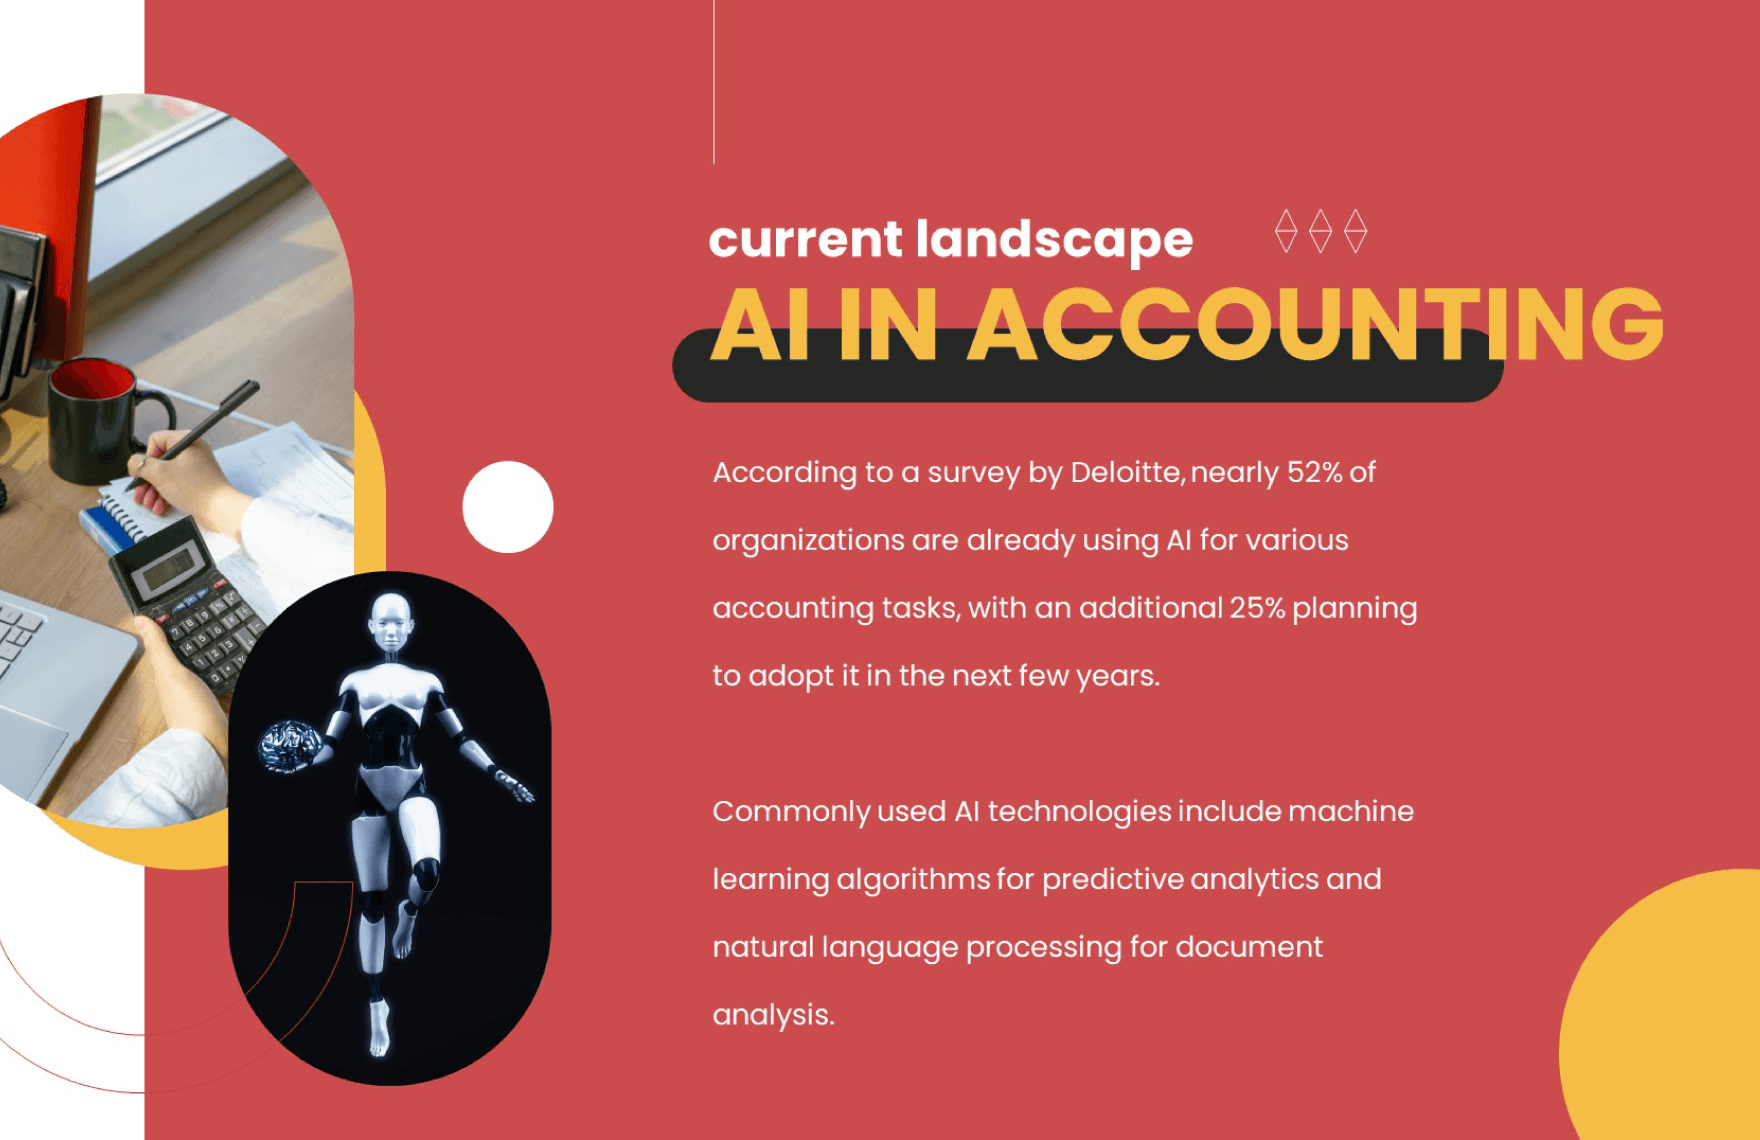 Artificial Intelligence in Accounting PPT Template